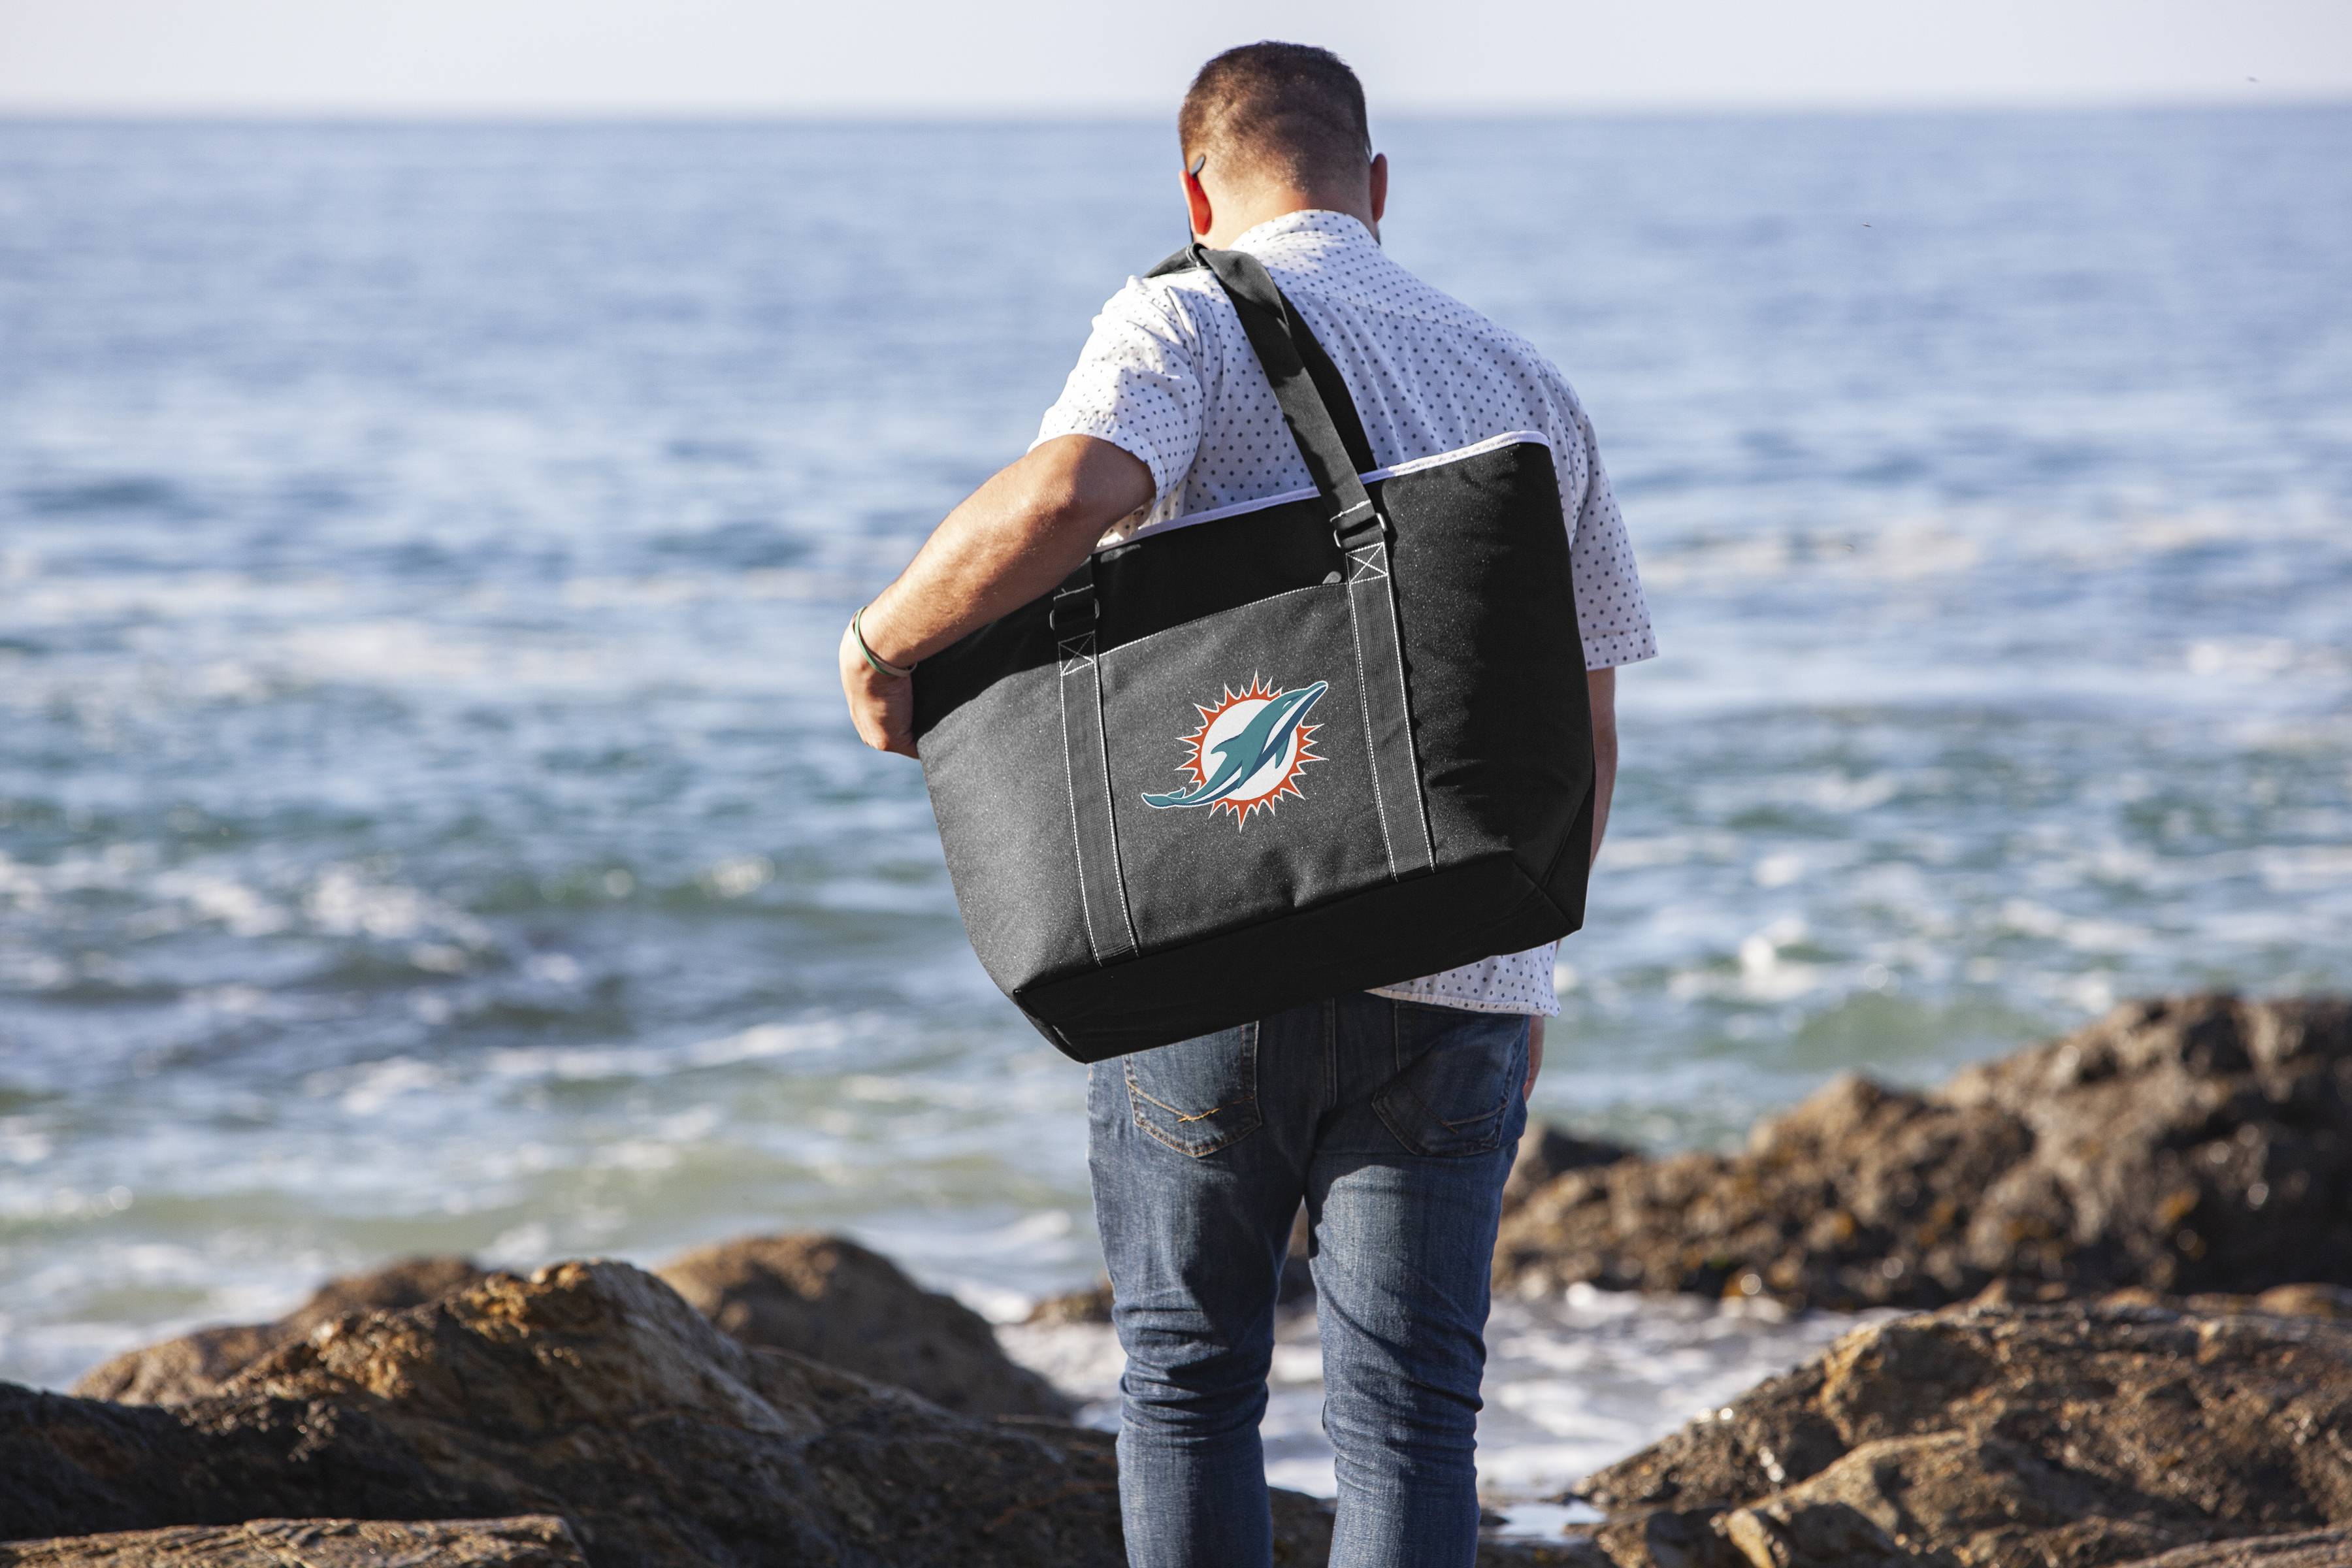 Miami Dolphins - Tahoe XL Cooler Tote Bag